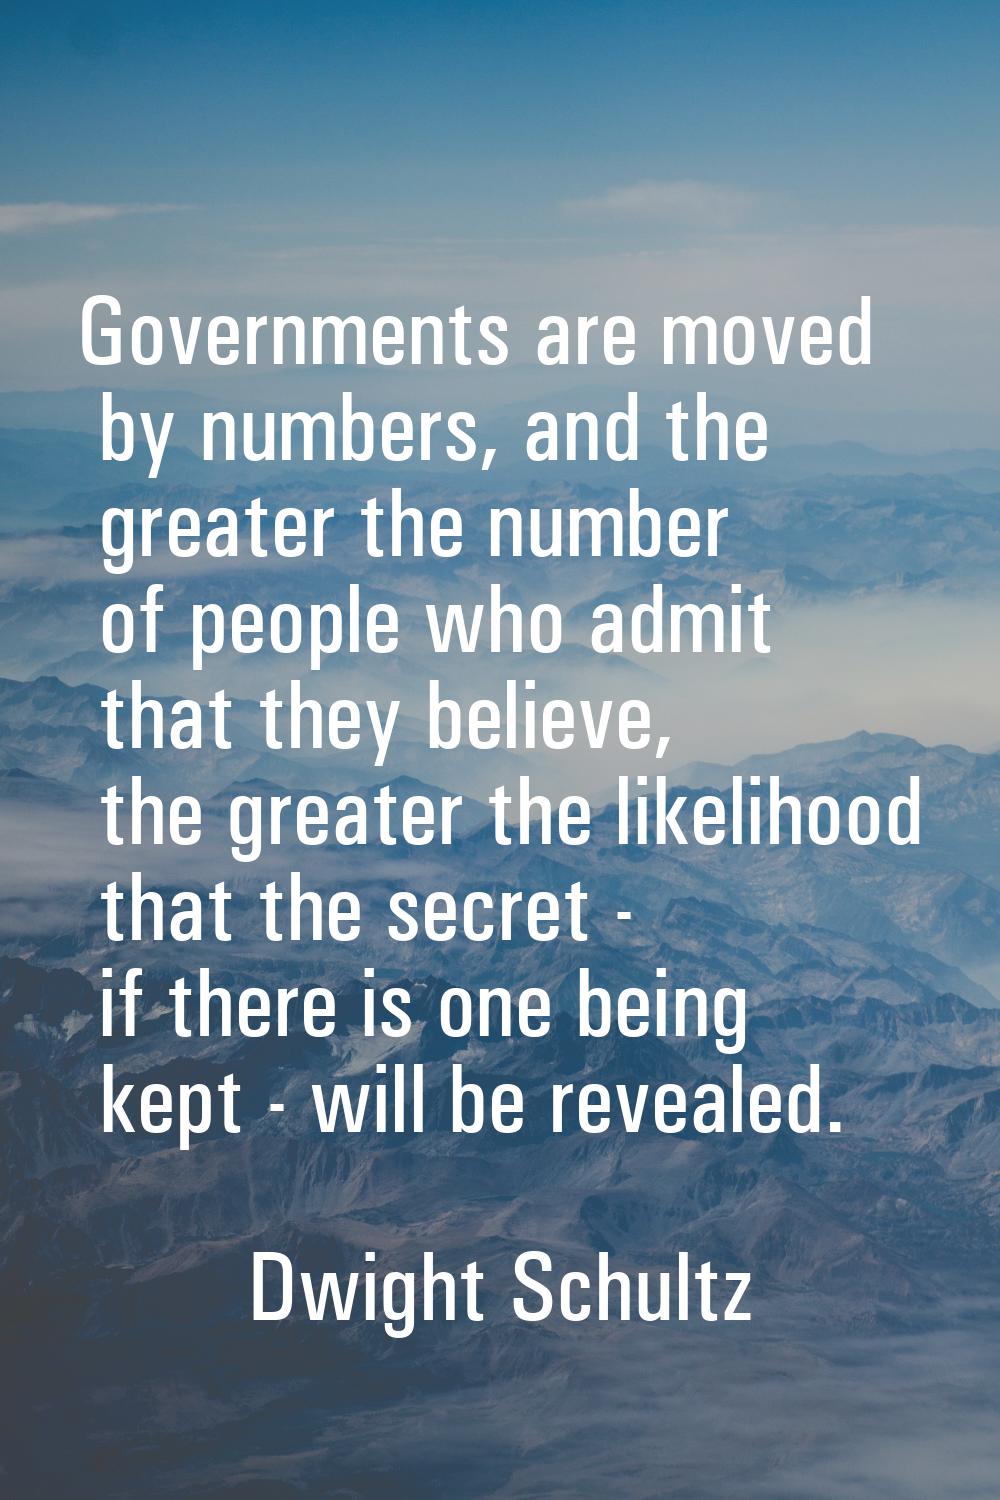 Governments are moved by numbers, and the greater the number of people who admit that they believe,